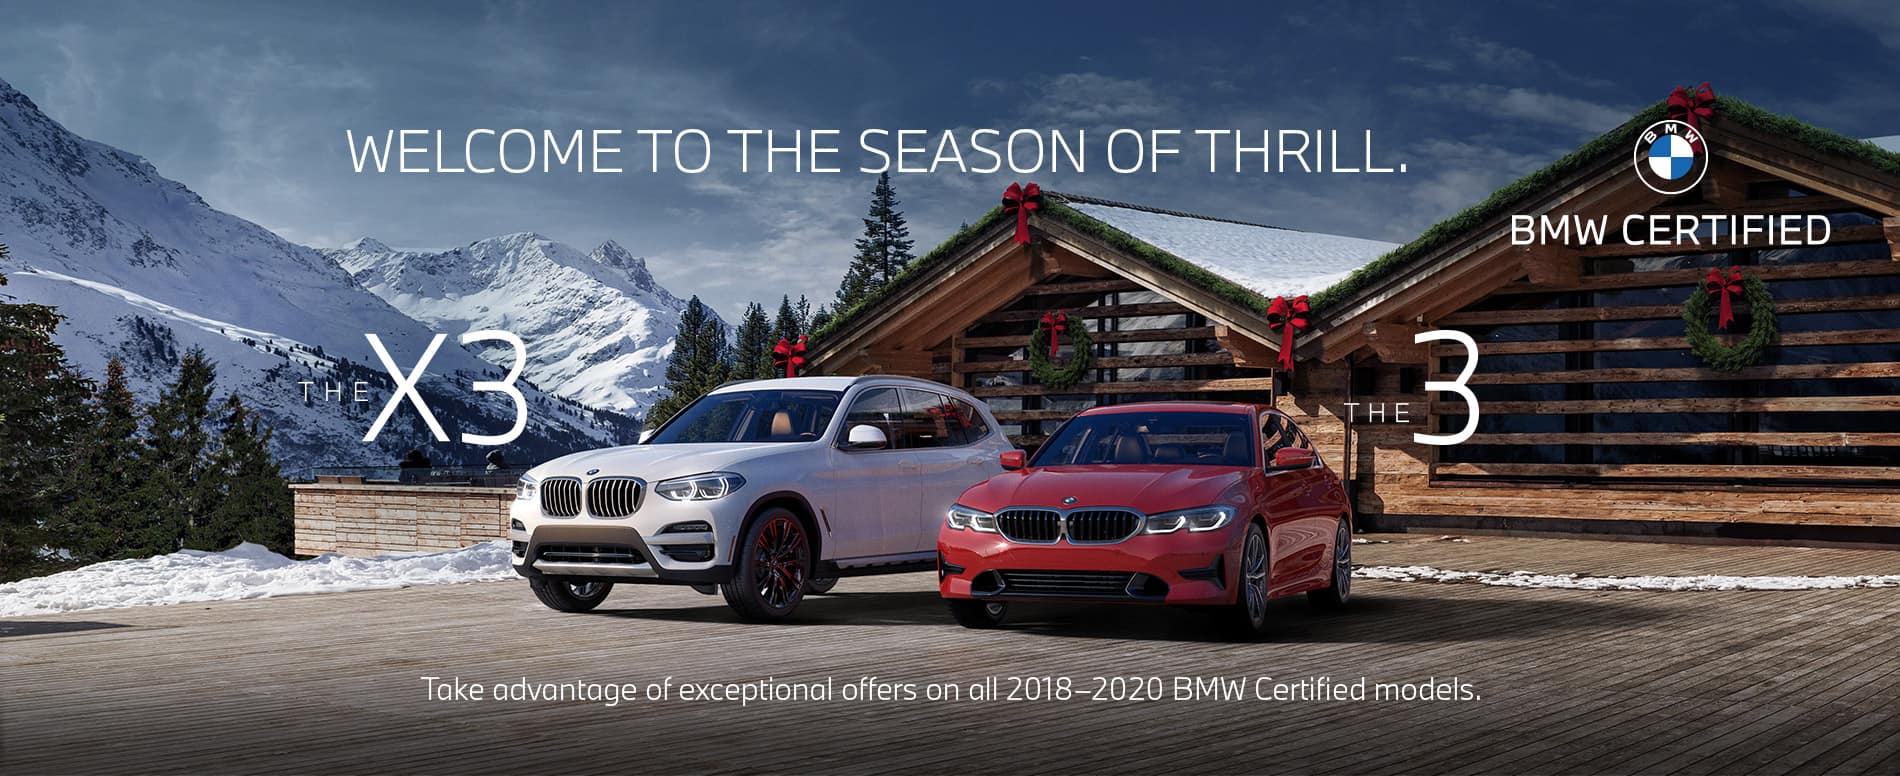 Explore BMW Certified offers on 2018-2020 models